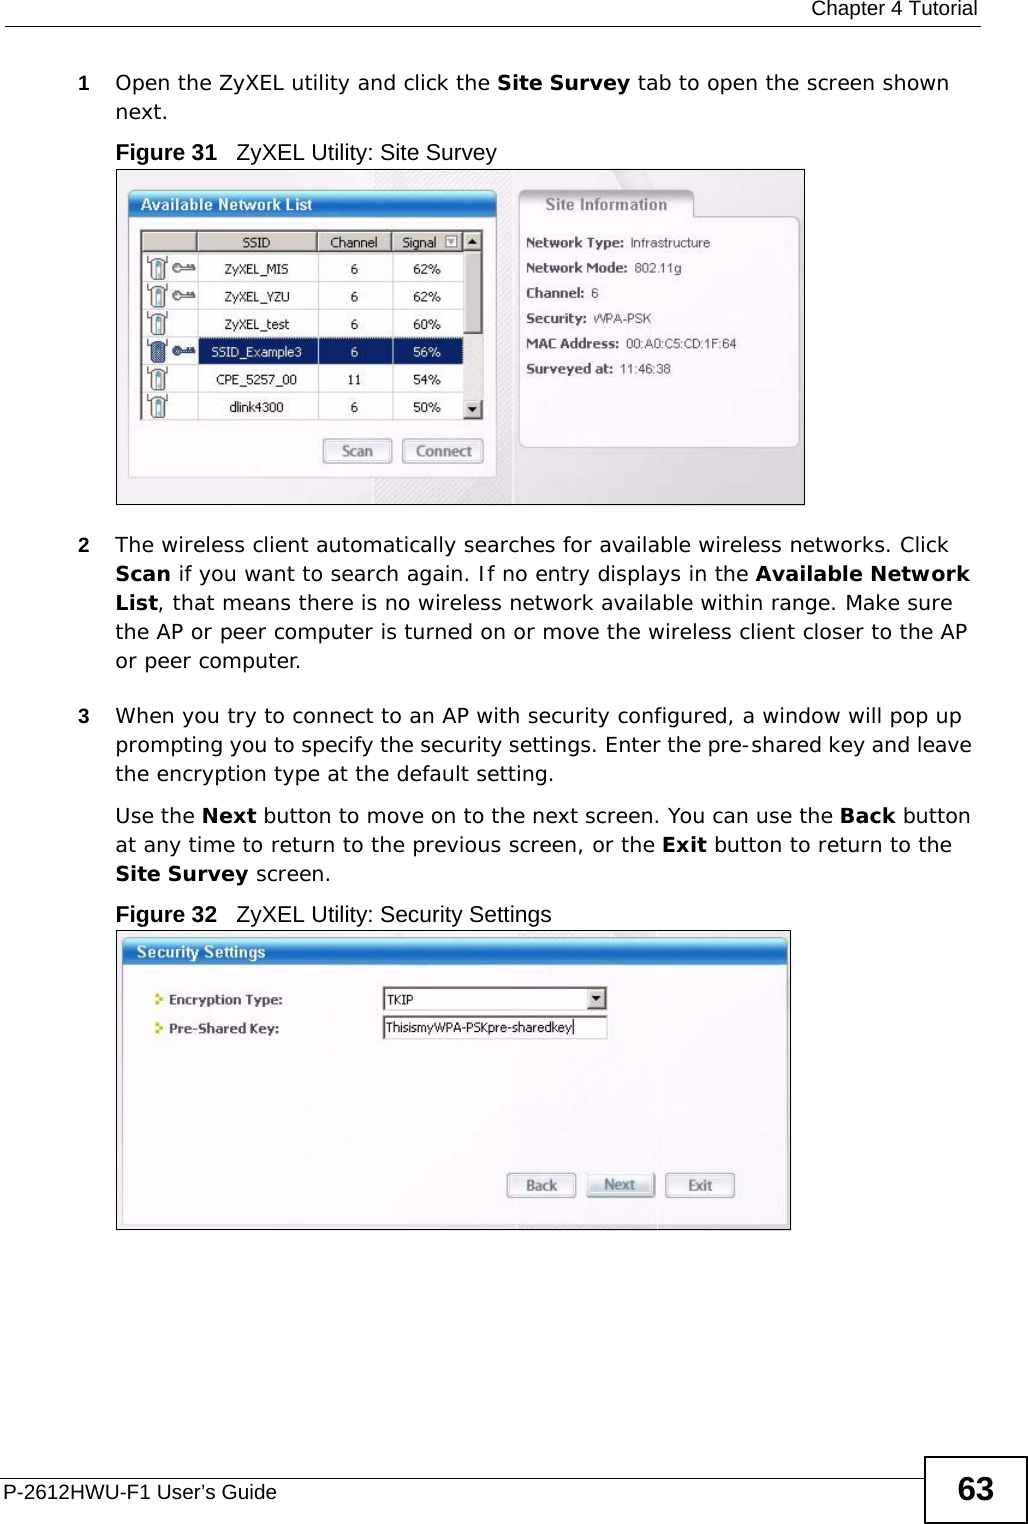  Chapter 4 TutorialP-2612HWU-F1 User’s Guide 631Open the ZyXEL utility and click the Site Survey tab to open the screen shown next.Figure 31   ZyXEL Utility: Site Survey 2The wireless client automatically searches for available wireless networks. Click Scan if you want to search again. If no entry displays in the Available Network List, that means there is no wireless network available within range. Make sure the AP or peer computer is turned on or move the wireless client closer to the AP or peer computer.3When you try to connect to an AP with security configured, a window will pop up prompting you to specify the security settings. Enter the pre-shared key and leave the encryption type at the default setting.Use the Next button to move on to the next screen. You can use the Back button at any time to return to the previous screen, or the Exit button to return to the Site Survey screen.Figure 32   ZyXEL Utility: Security Settings 